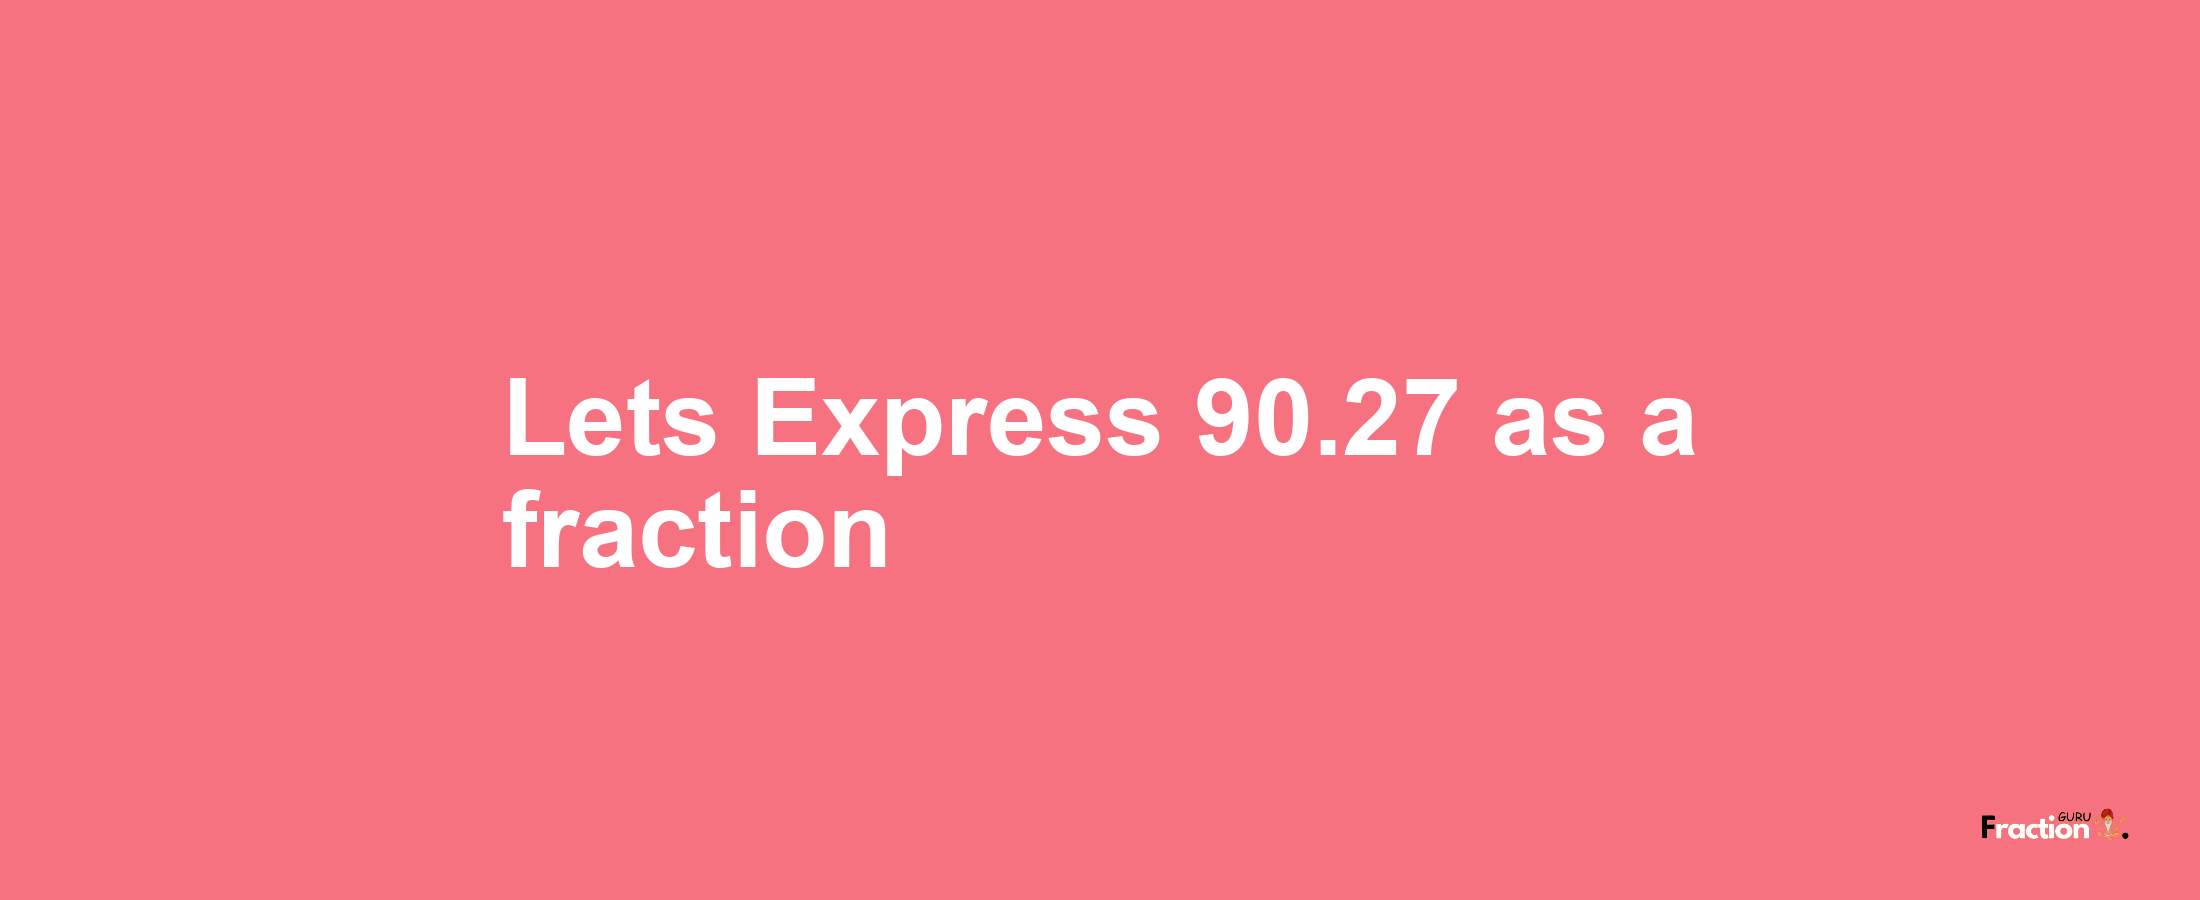 Lets Express 90.27 as afraction